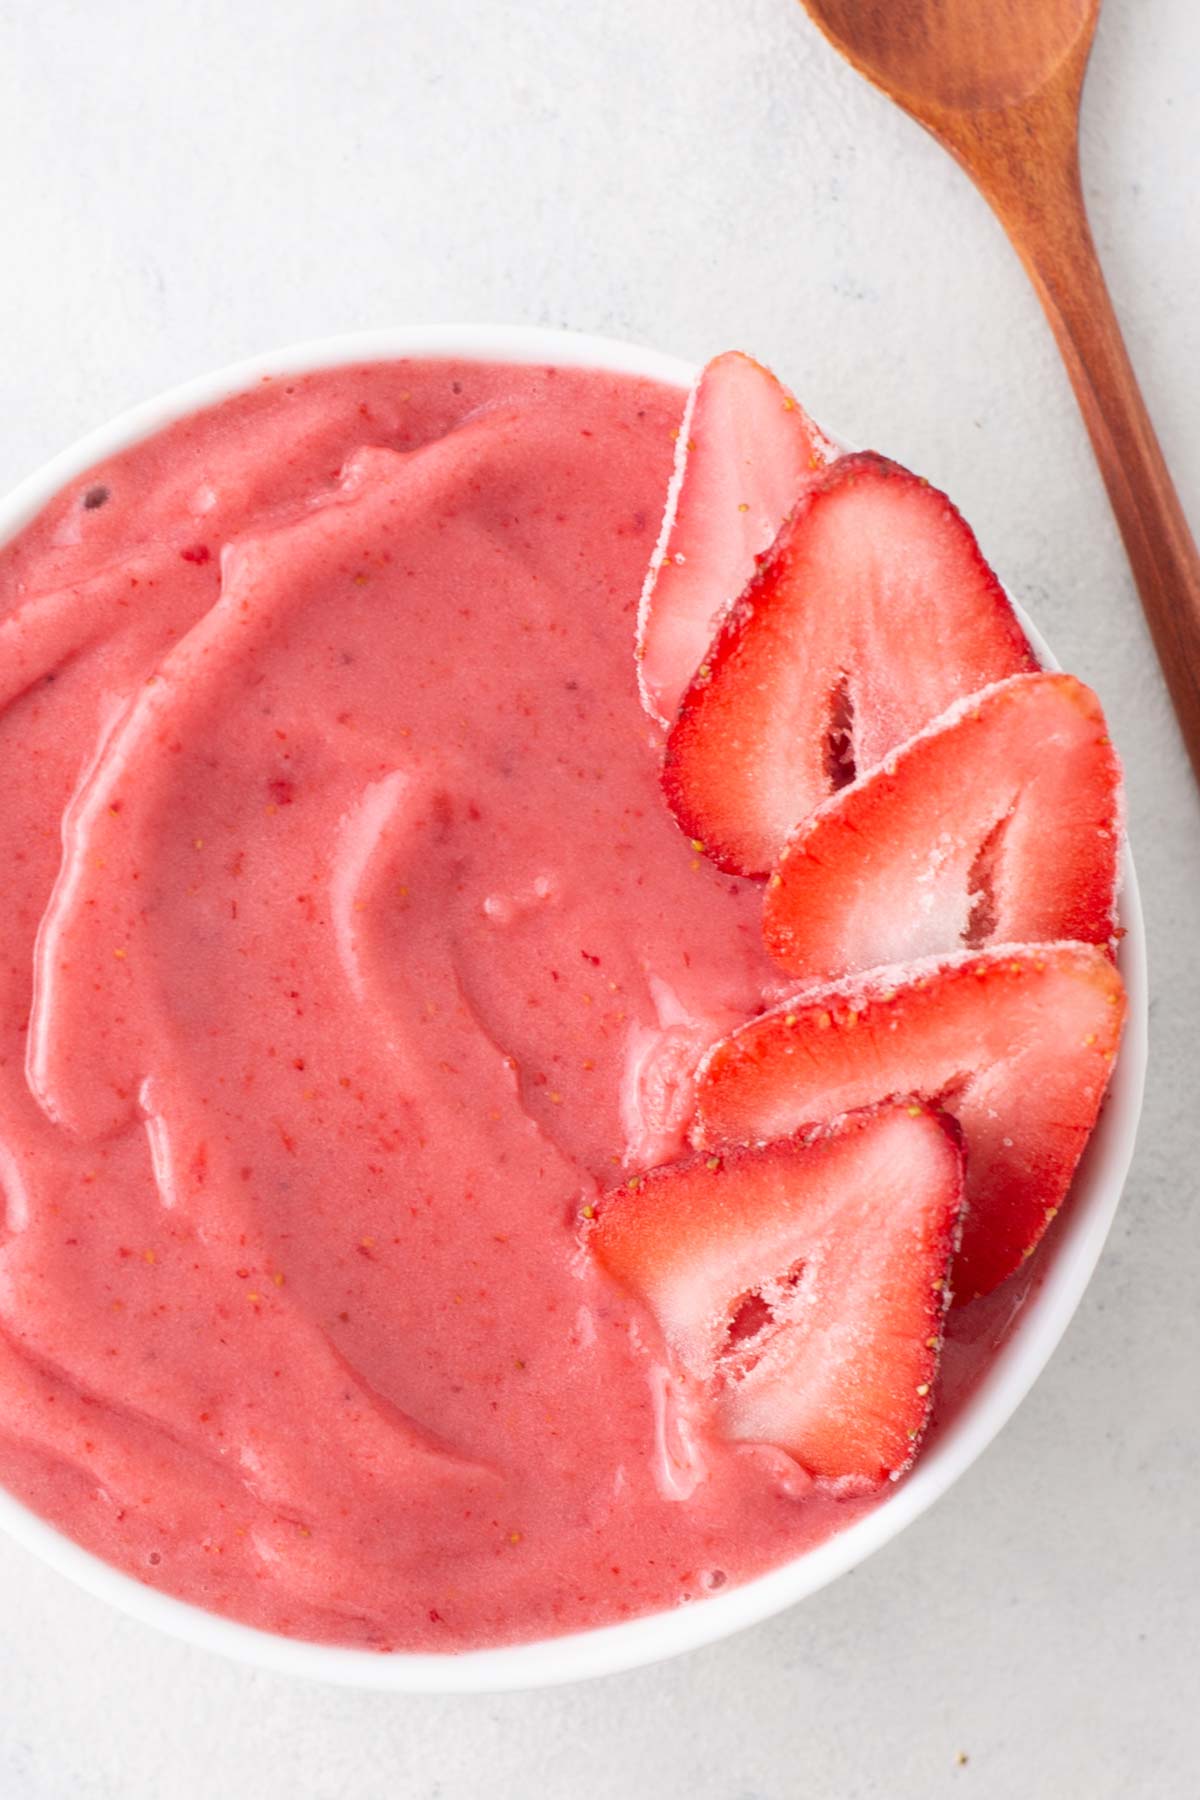 Strawberry smoothie bowl garnished with sliced strawberries.